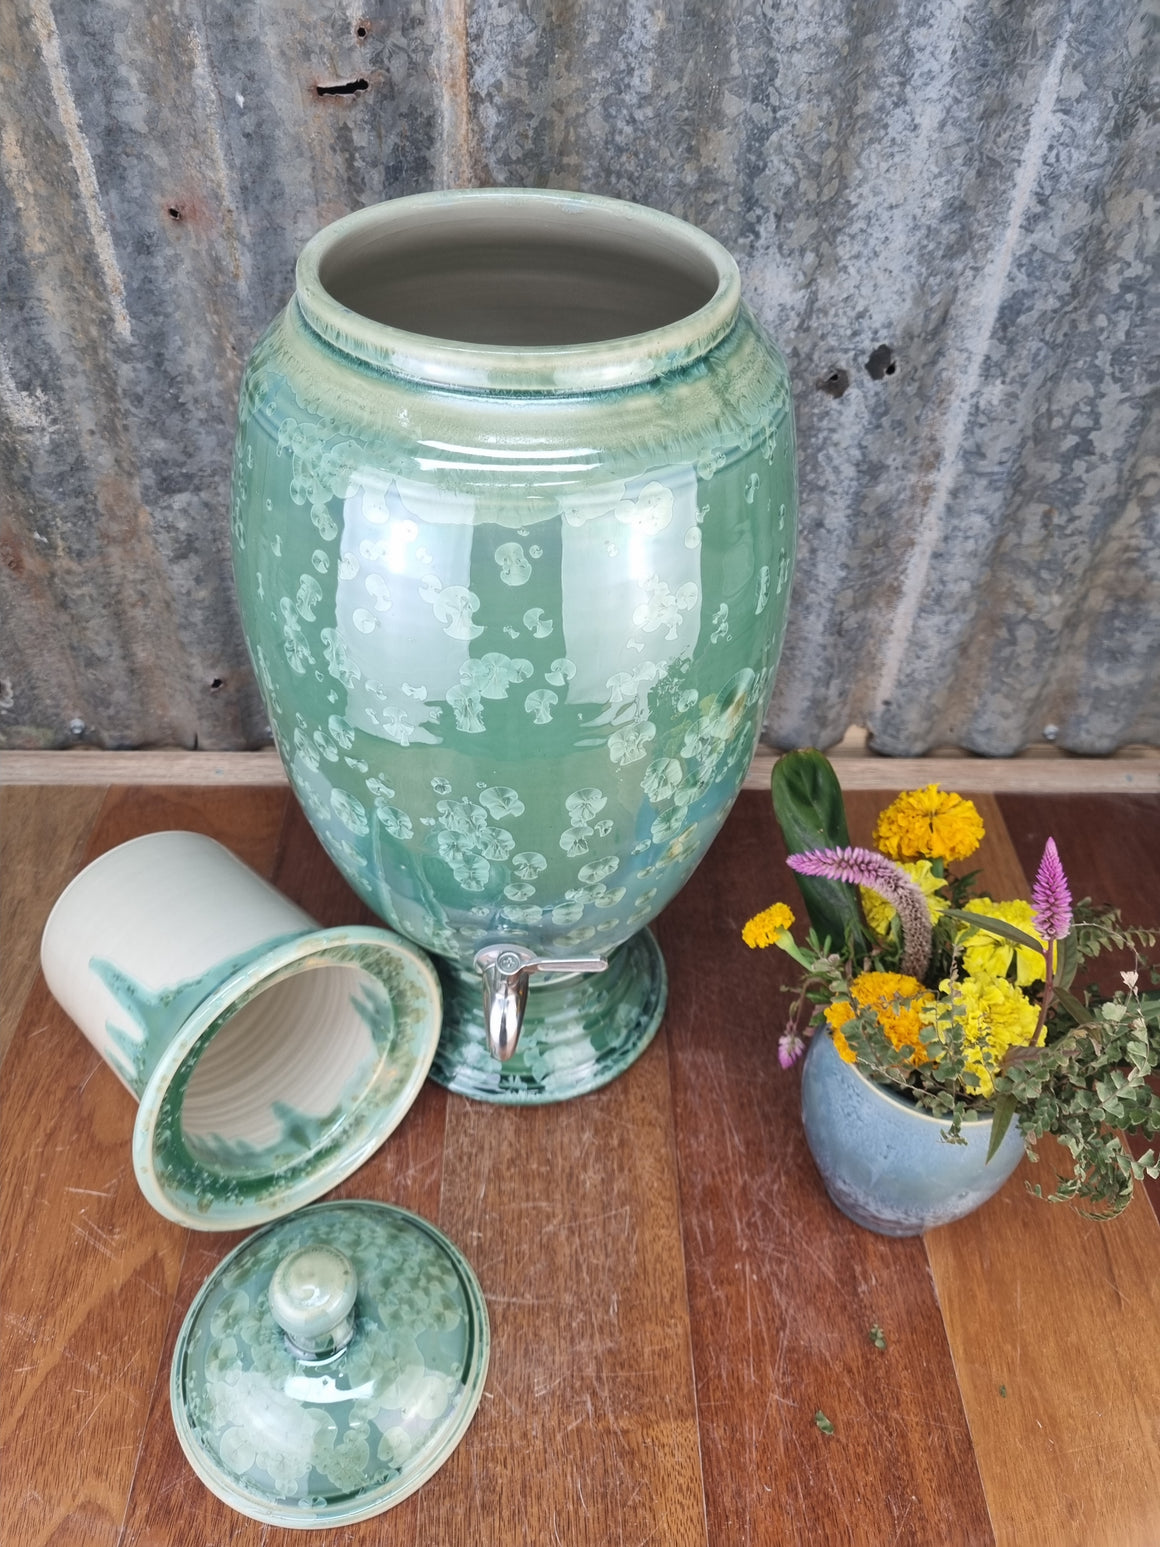 Crystalline Green Ceramic Water Filter - Peter Wallace Pottery